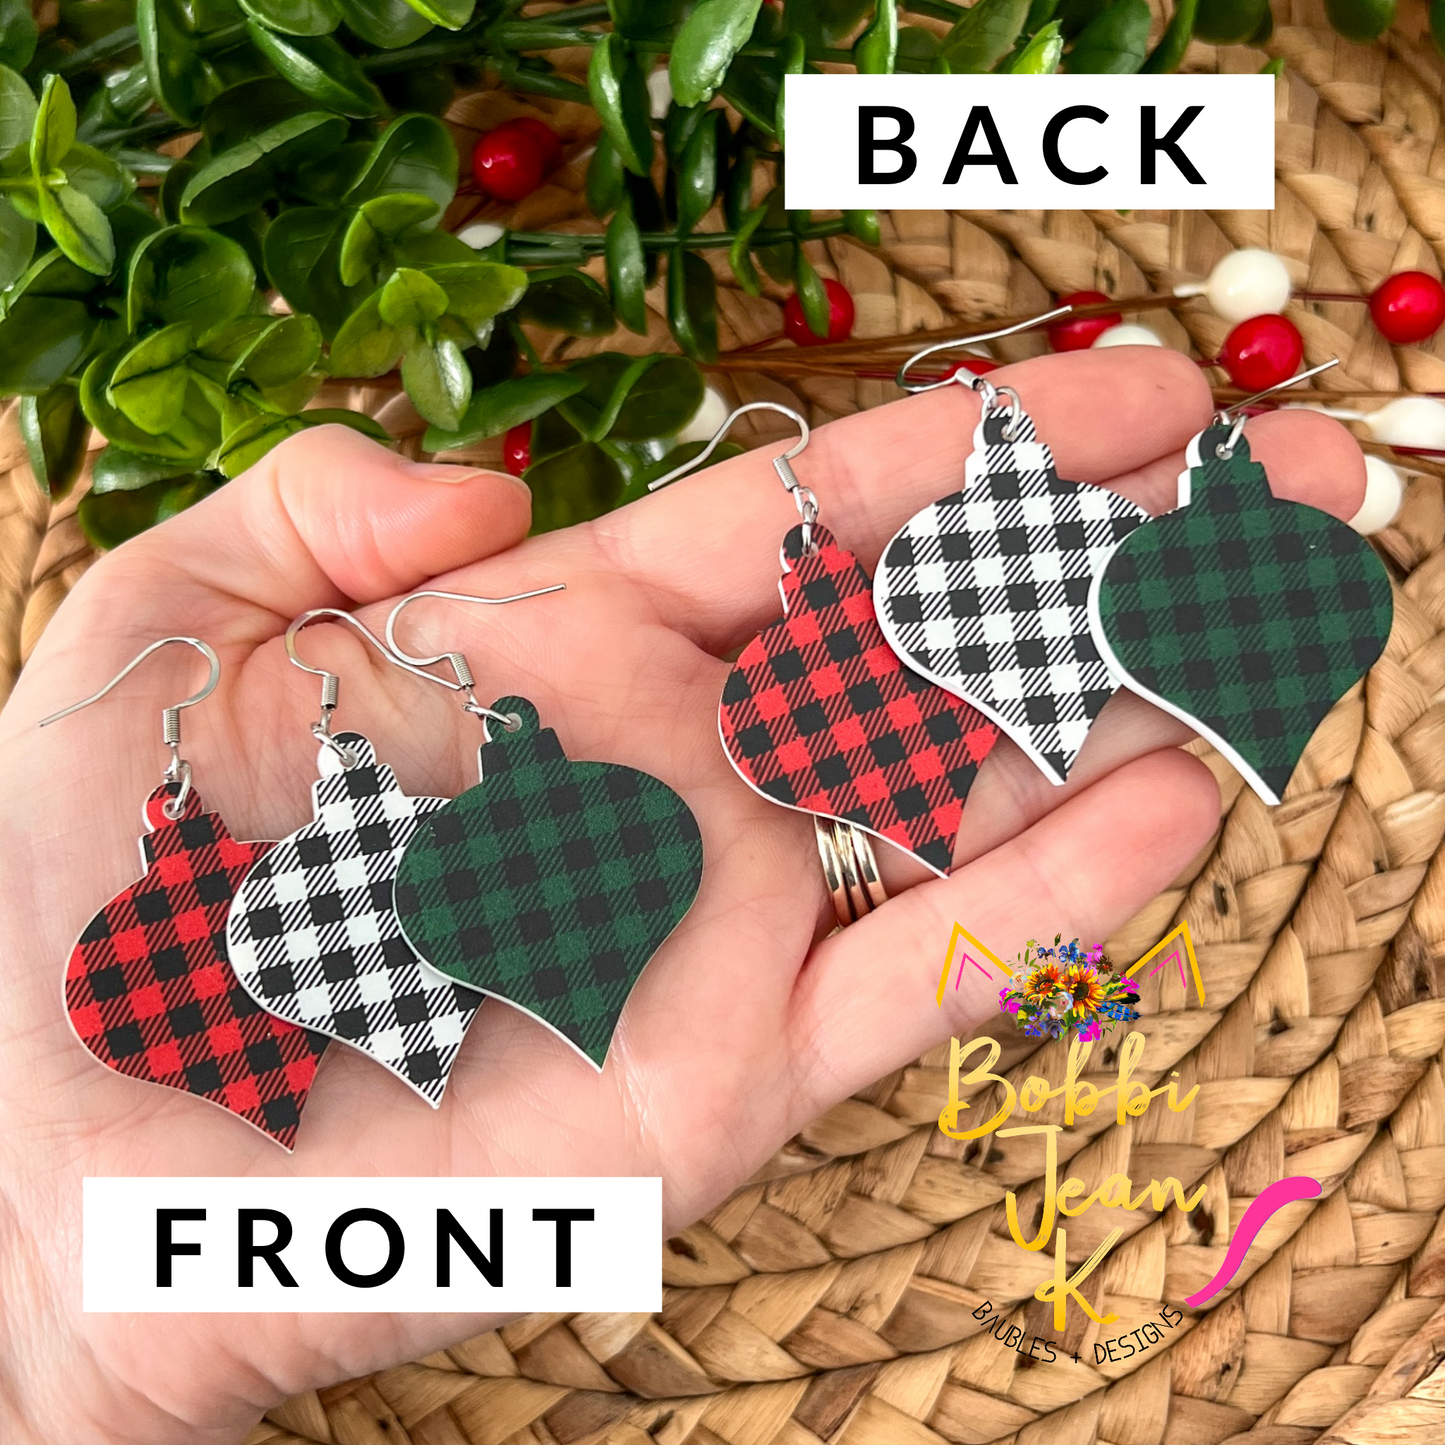 Red & Black Plaid Acrylic Ornament Earrings: Choose From 2 Shape Options